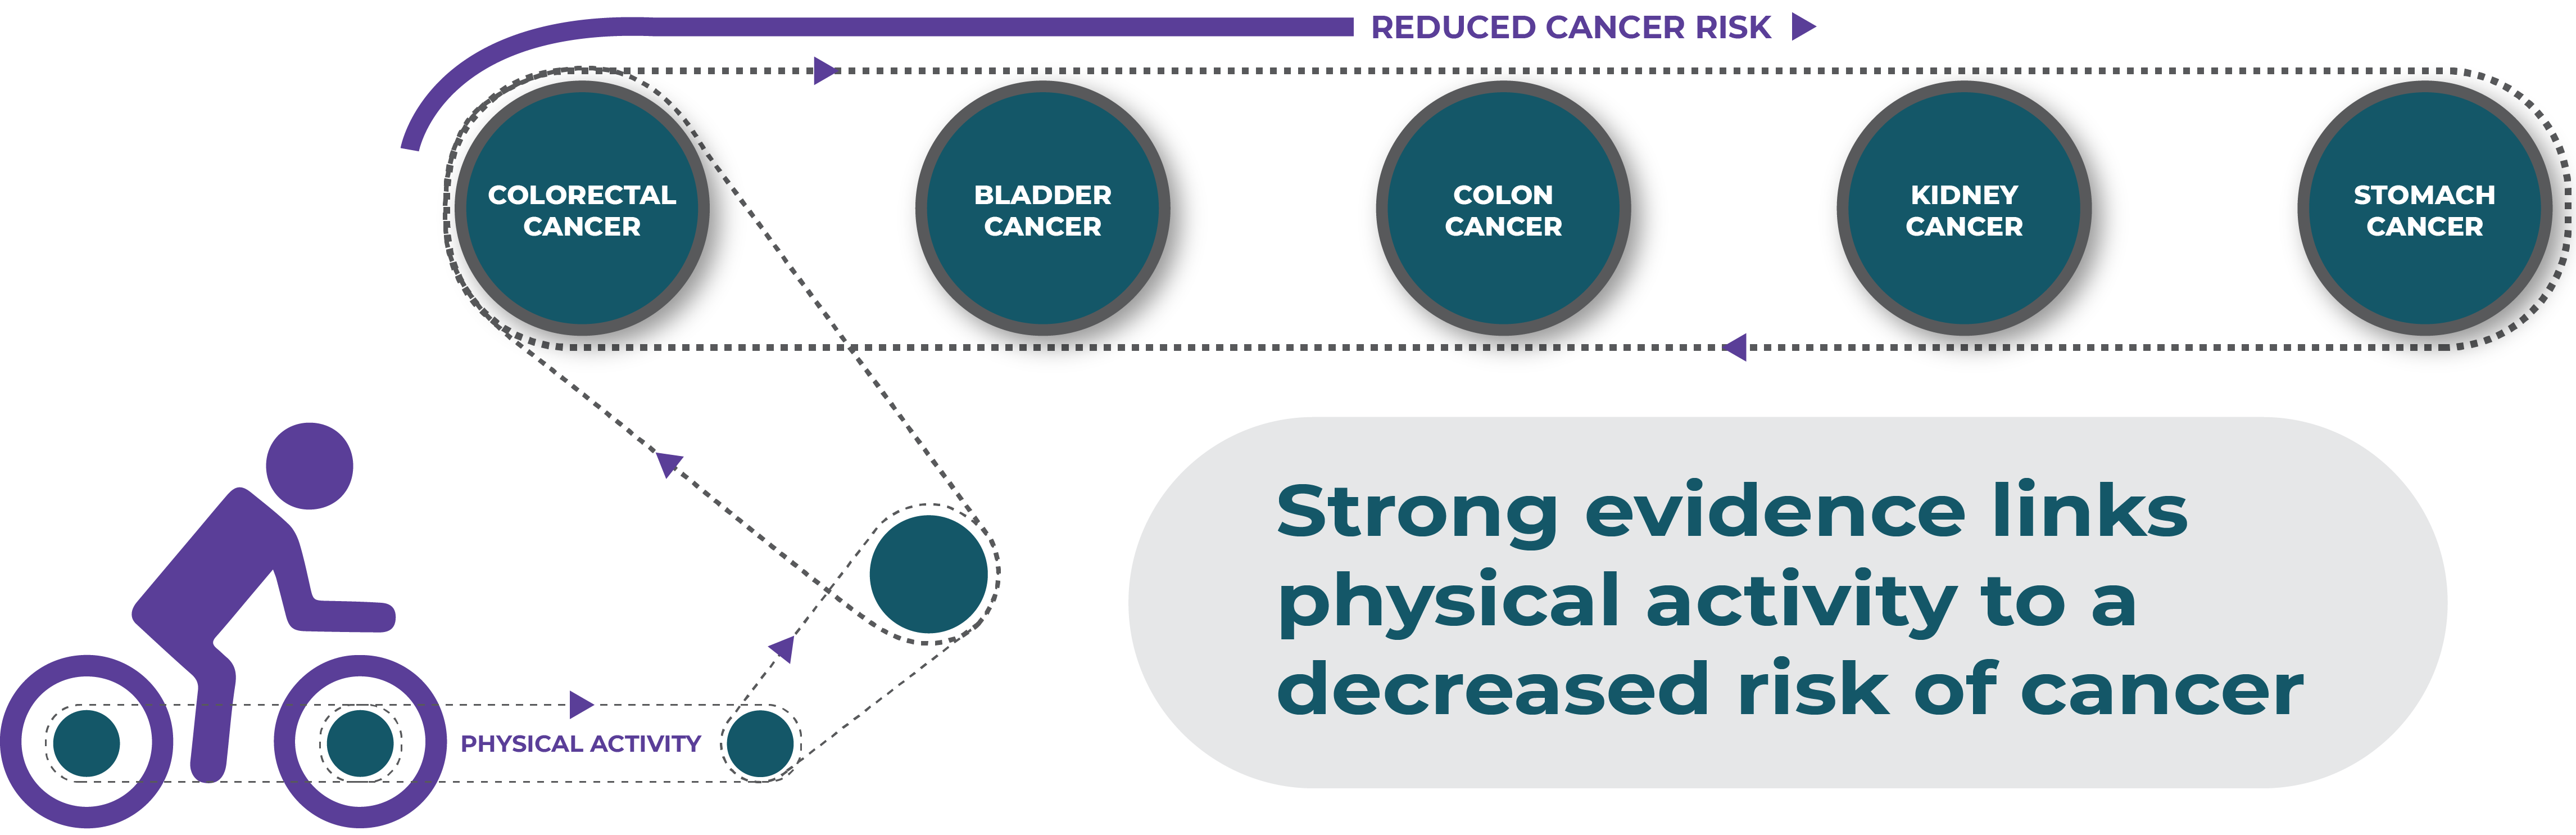 strong evidence links physical activity to a decreased risk of cancer such as colorectal, bladder, colon, kidney and stomach cancers